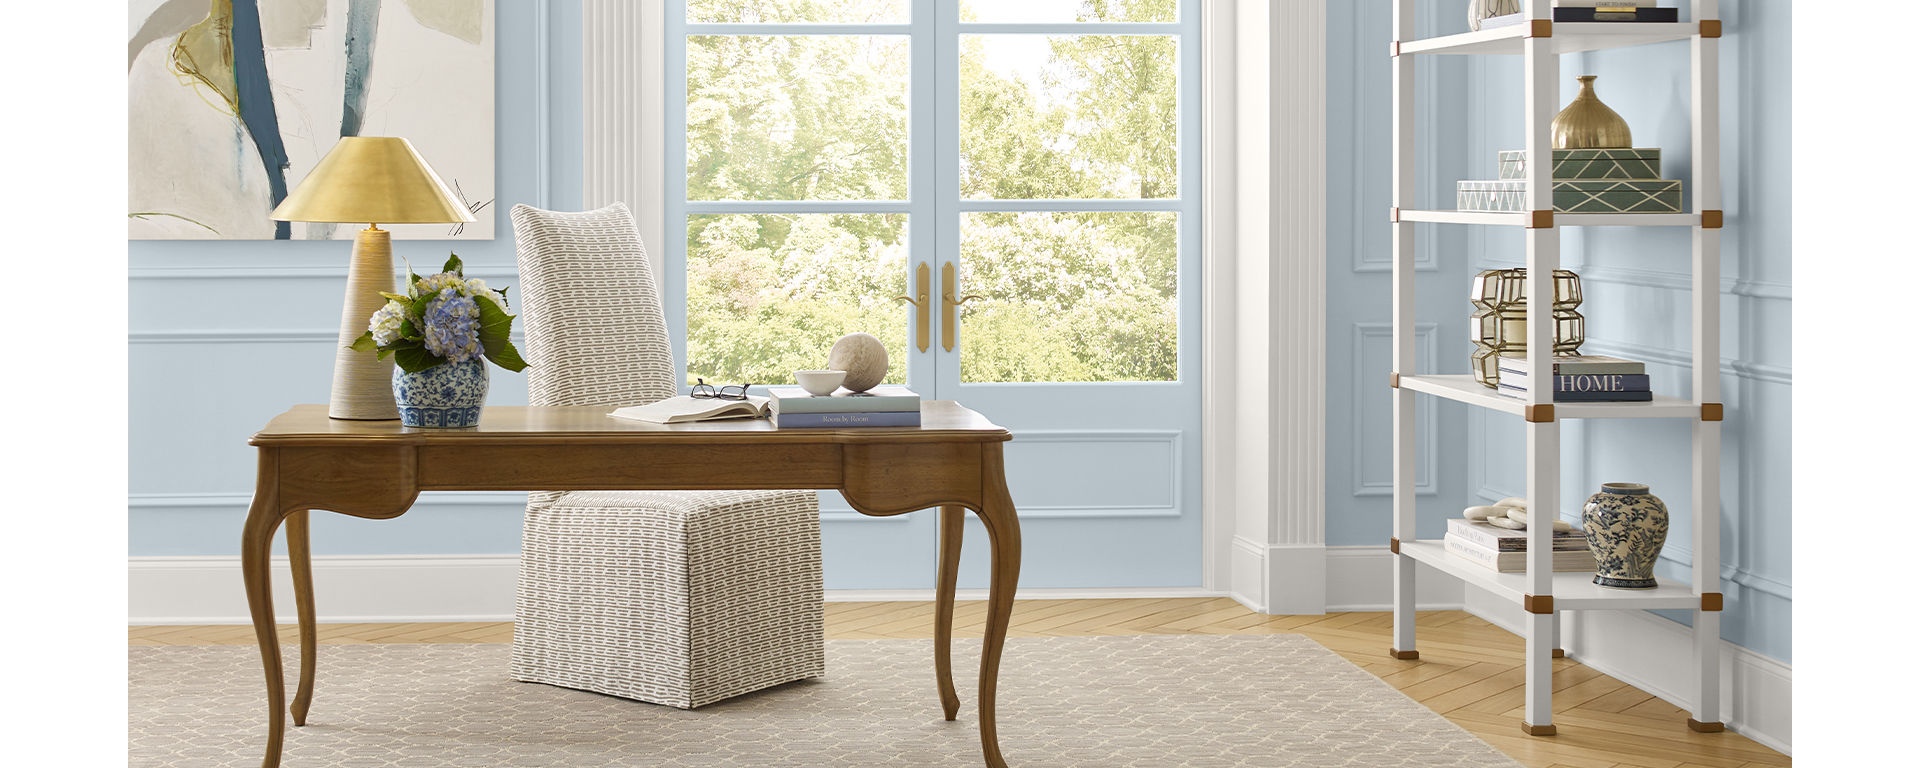 Home office featuring walls painted light blue, fabric-covered chair, wood desk with curved legs, neutral rug on herringbone wood floor, decorative white bookshelf, and French doors to outside.